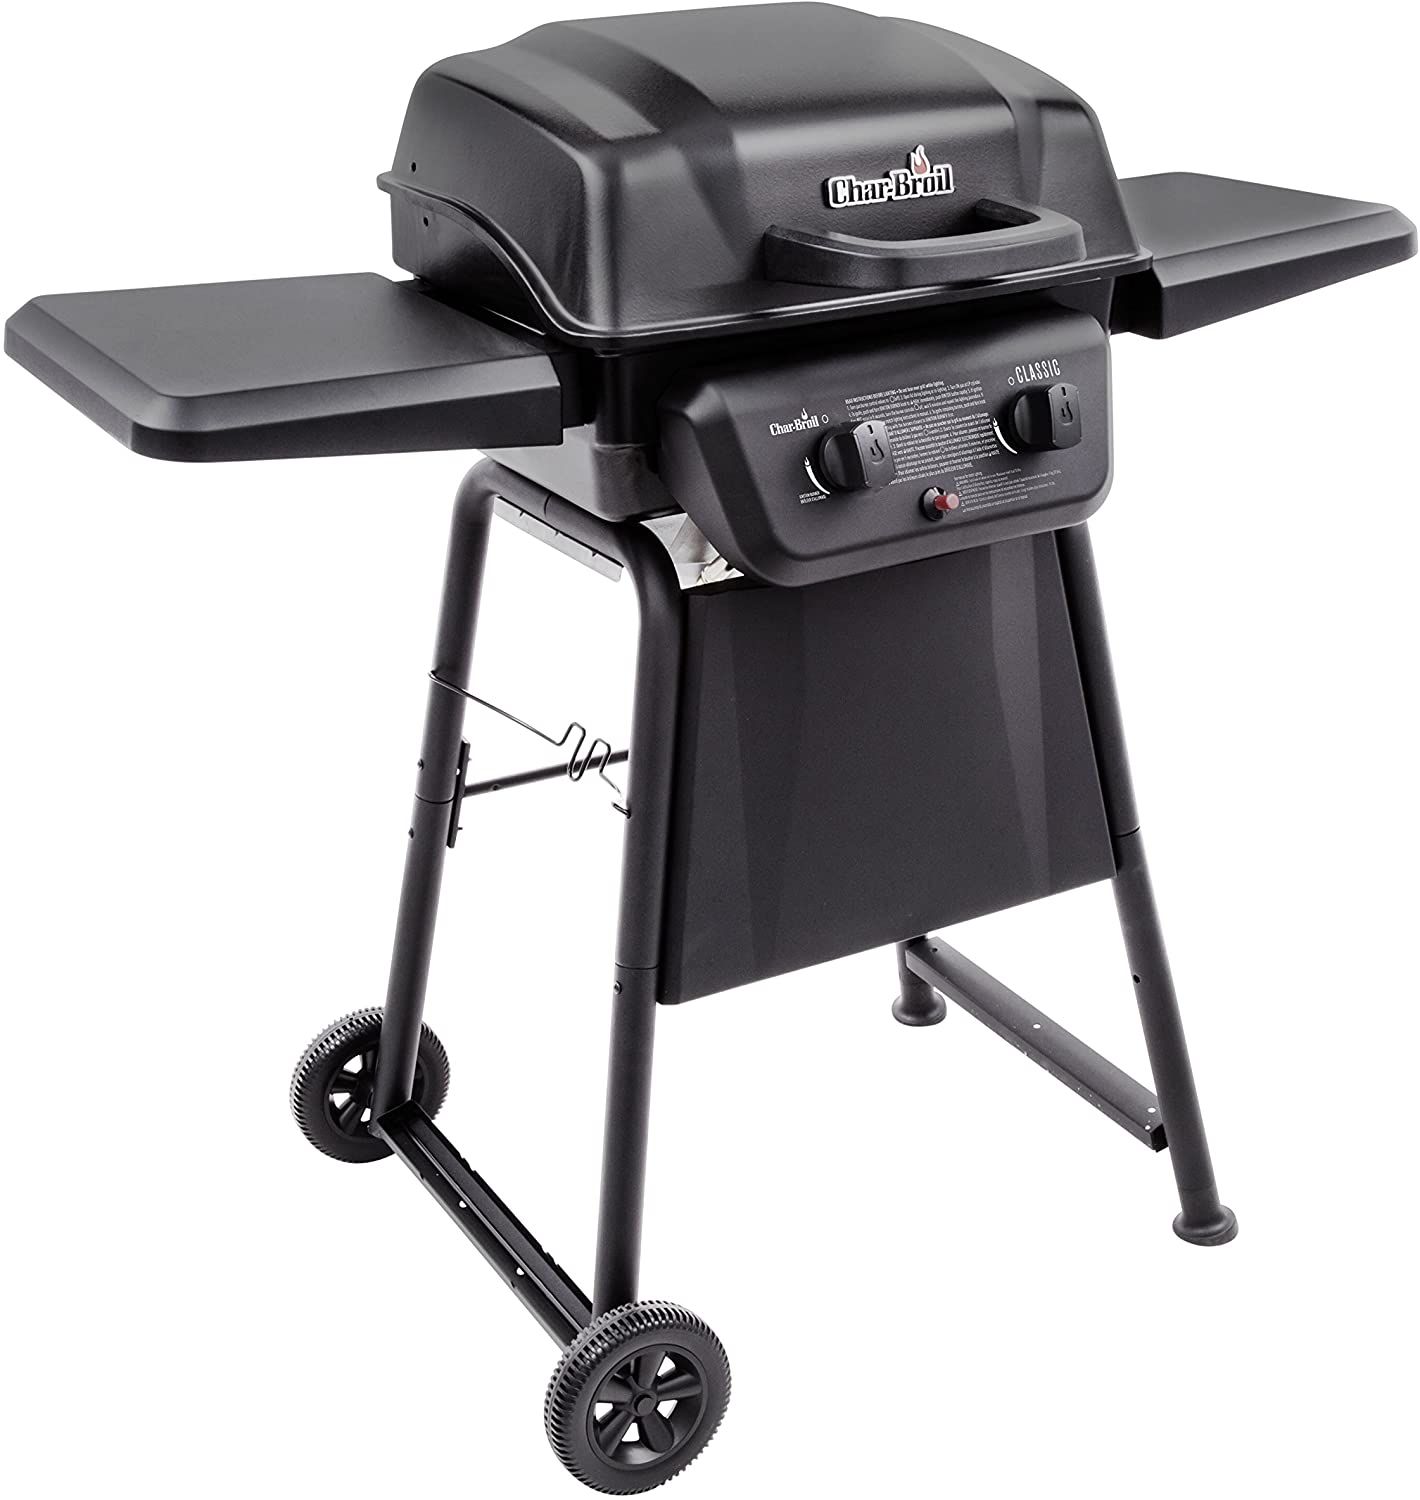 Char-Broil Classic 2-Burner Gas Grill 280 - $$title$$